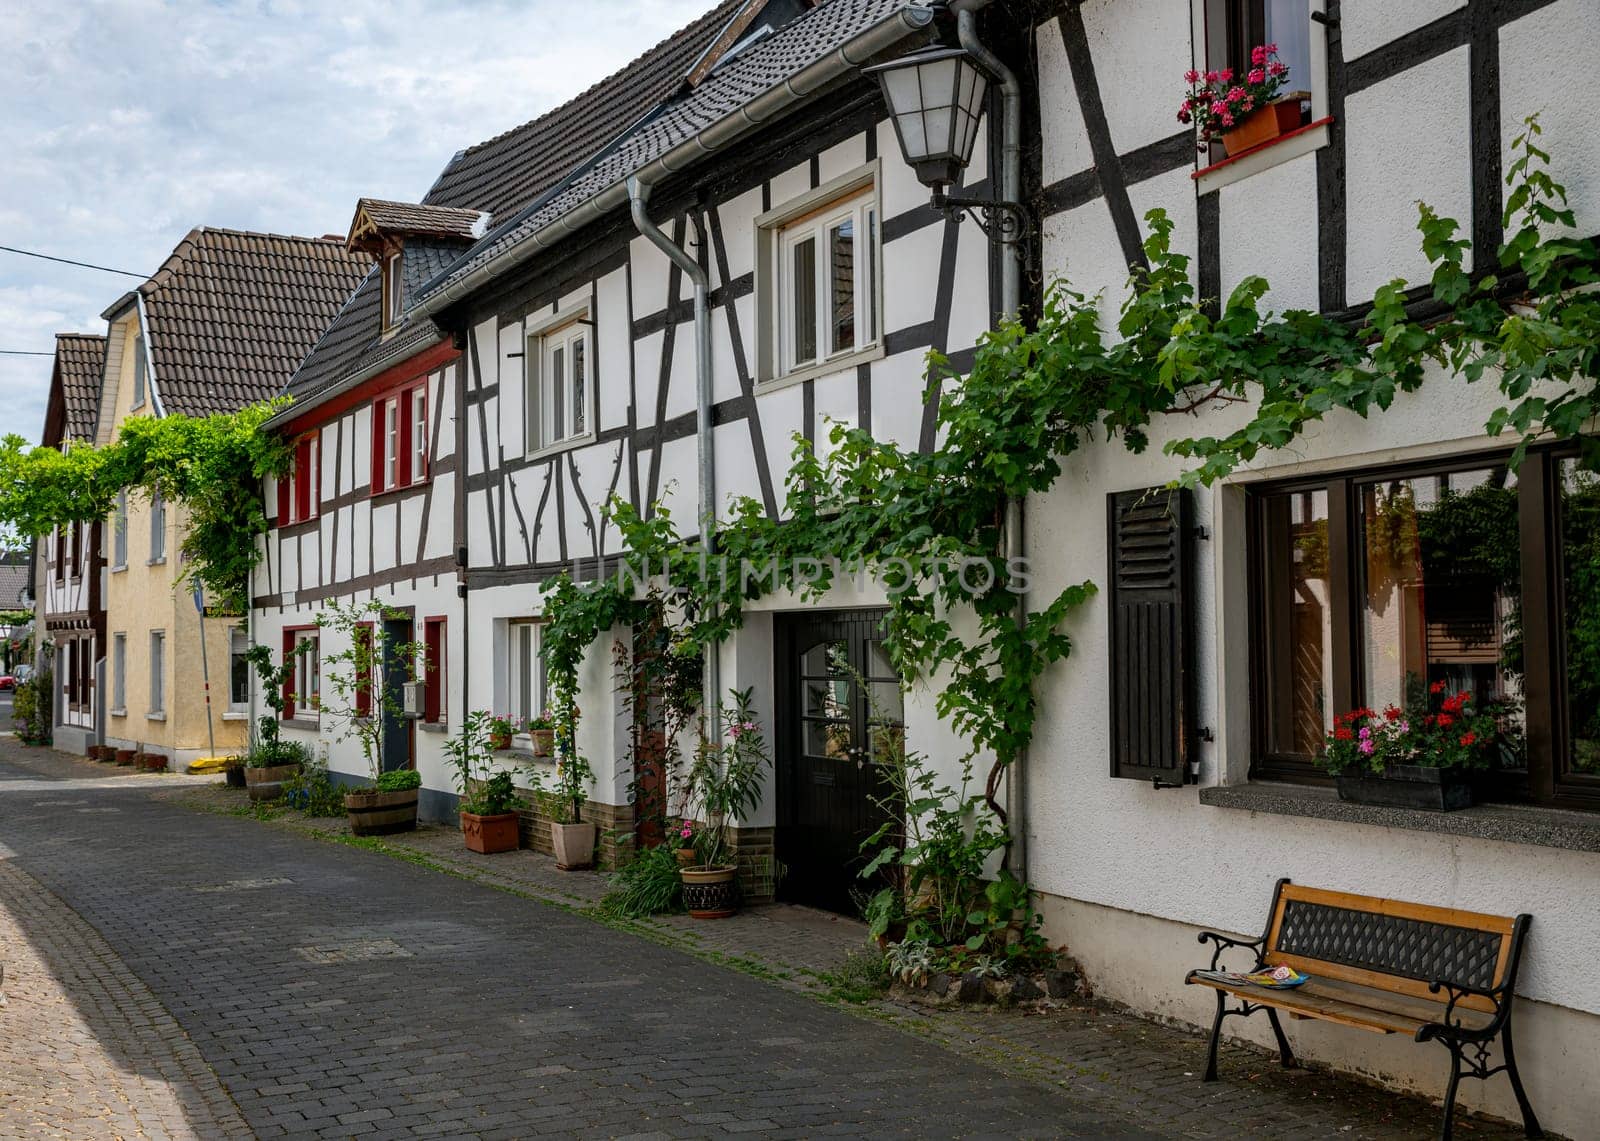 the grape vines grow along the half timbered houses in the town of erpel in germany by compuinfoto